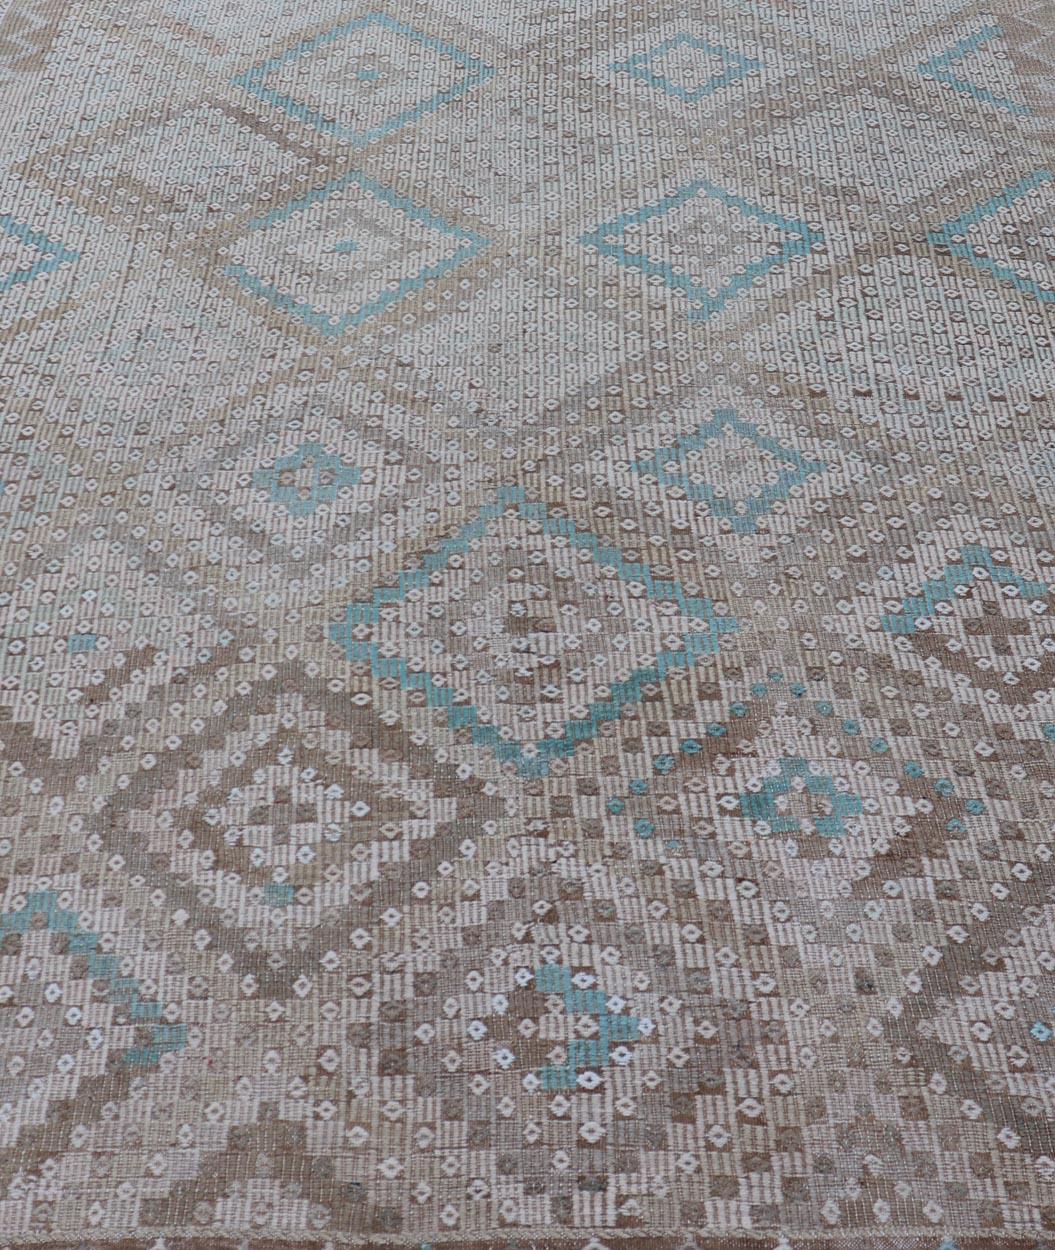  Vintage Hand Woven Turkish Embroidered Flat-Weave Rug with Geometric Design In Good Condition For Sale In Atlanta, GA